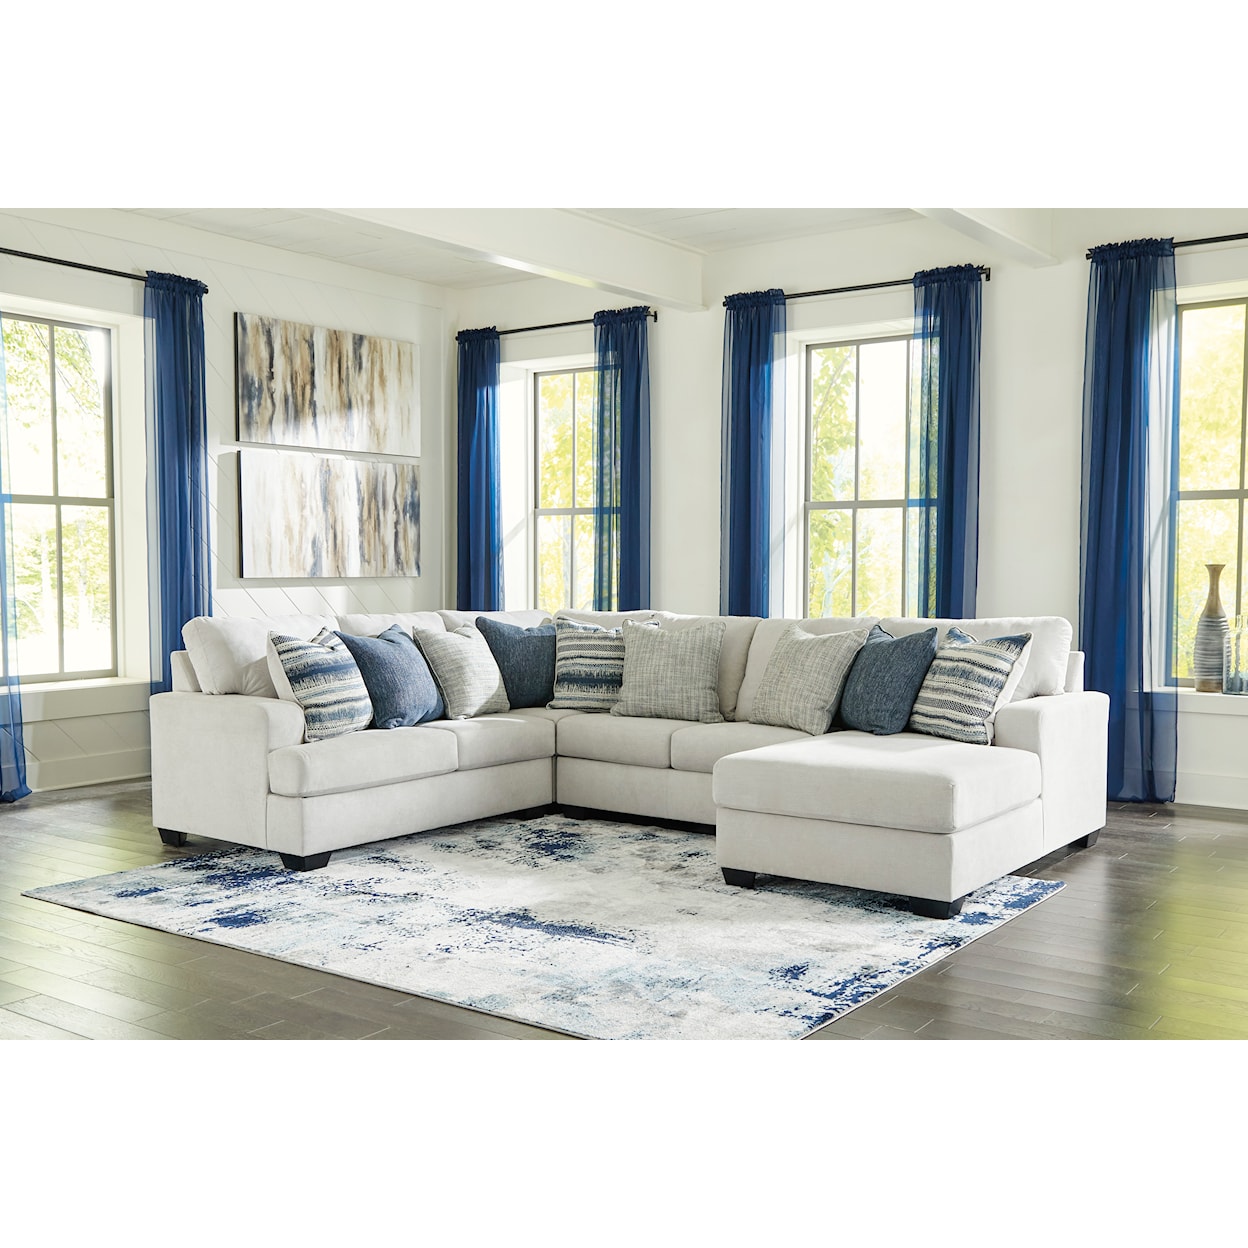 Benchcraft Lowder 4-Piece Sectional with Chaise